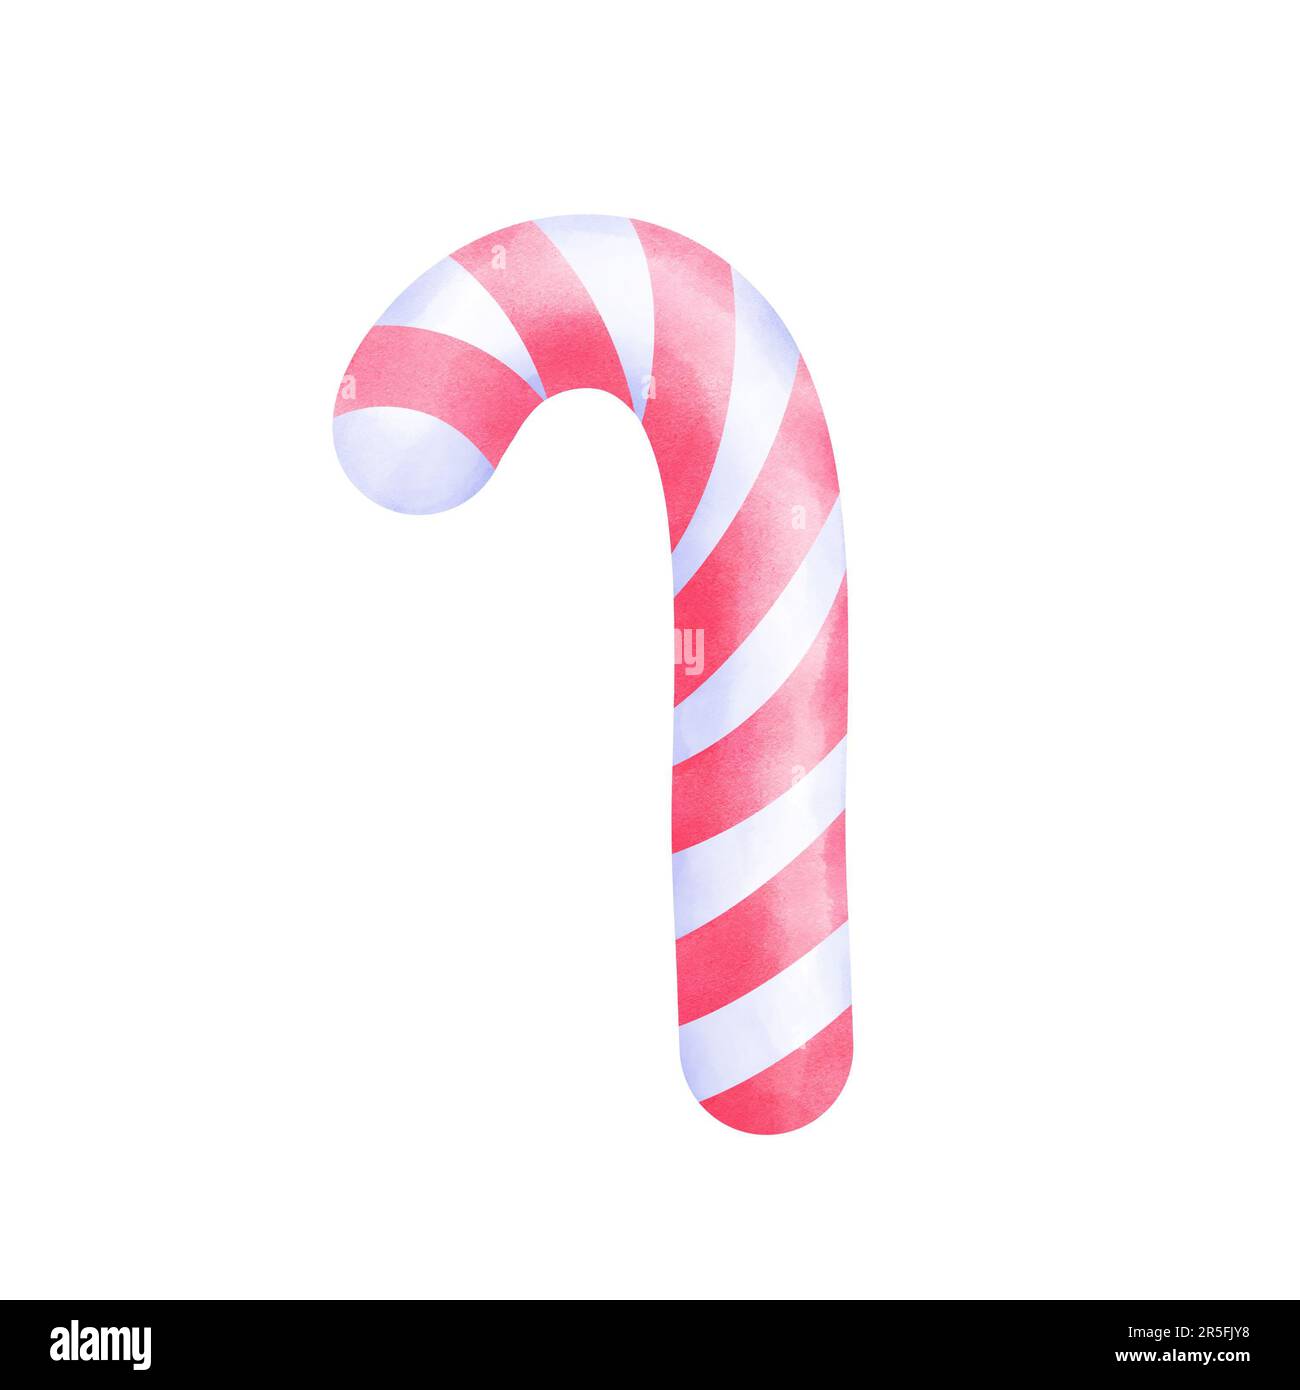 Watercolor pink and white candy cane clipart. Hand drawn watercolor candies illustration isolated on white background.Halloween candy,Christmas candy, Stock Photo